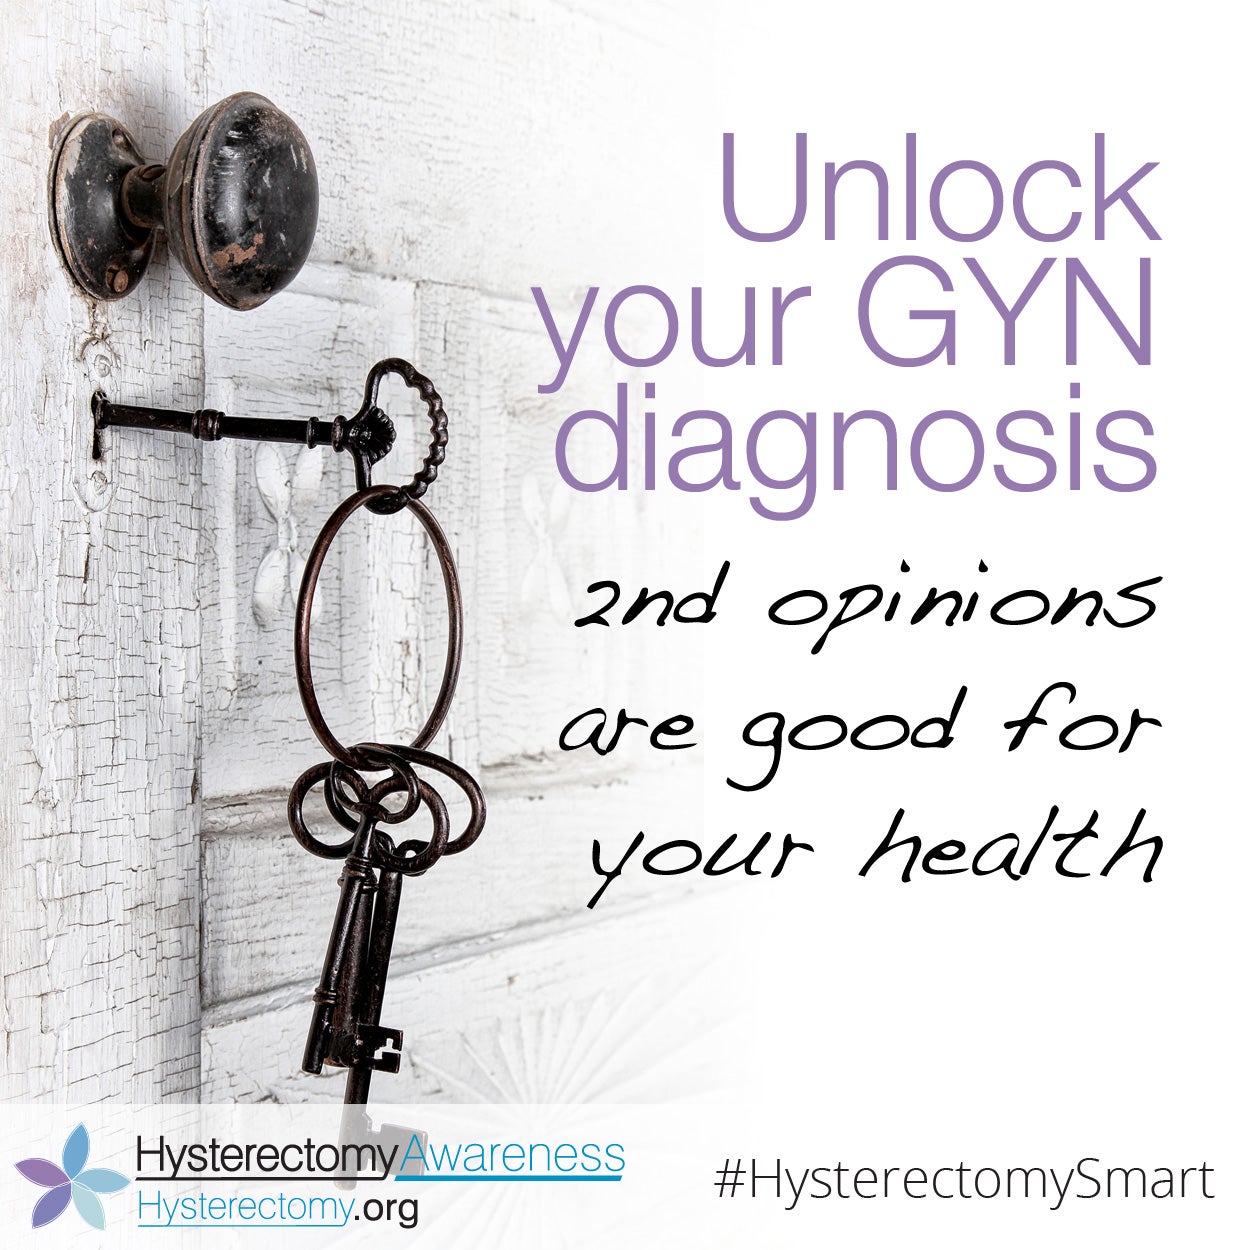 Unlock your diagnosis – Second Opinions are good for your health #GYNSymptoms #HysterectomySmart